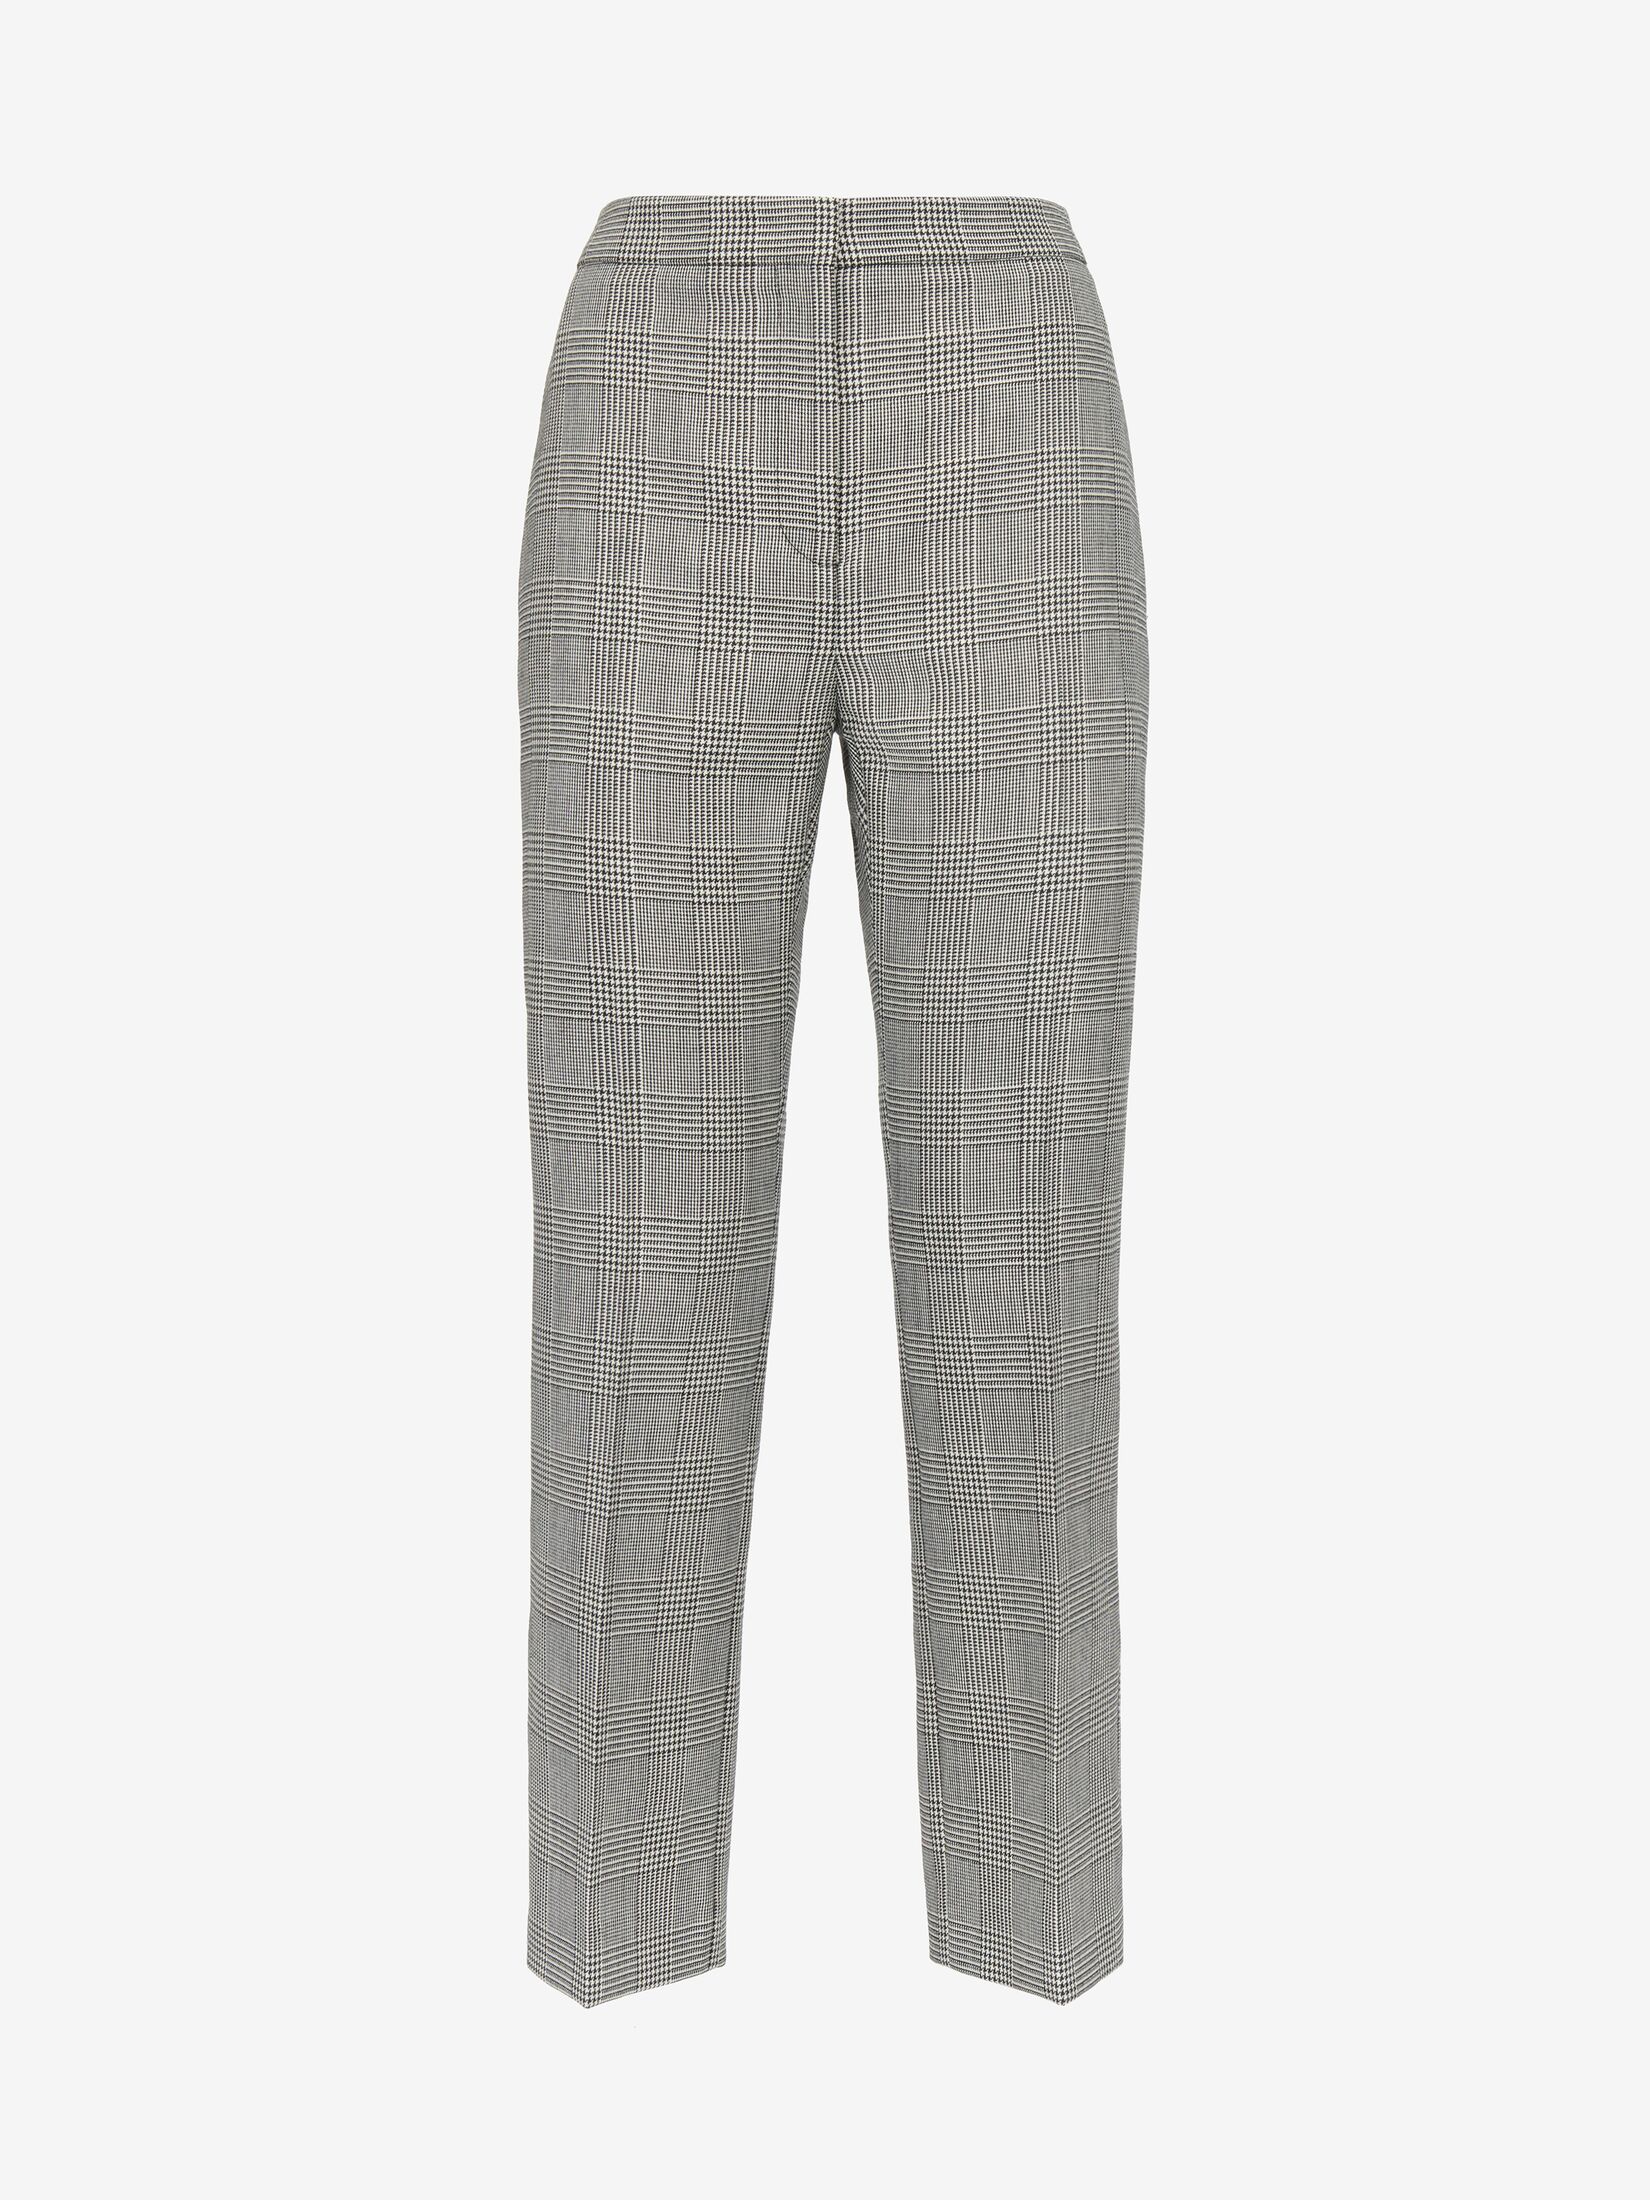 Prince of Wales Cigarette Trousers